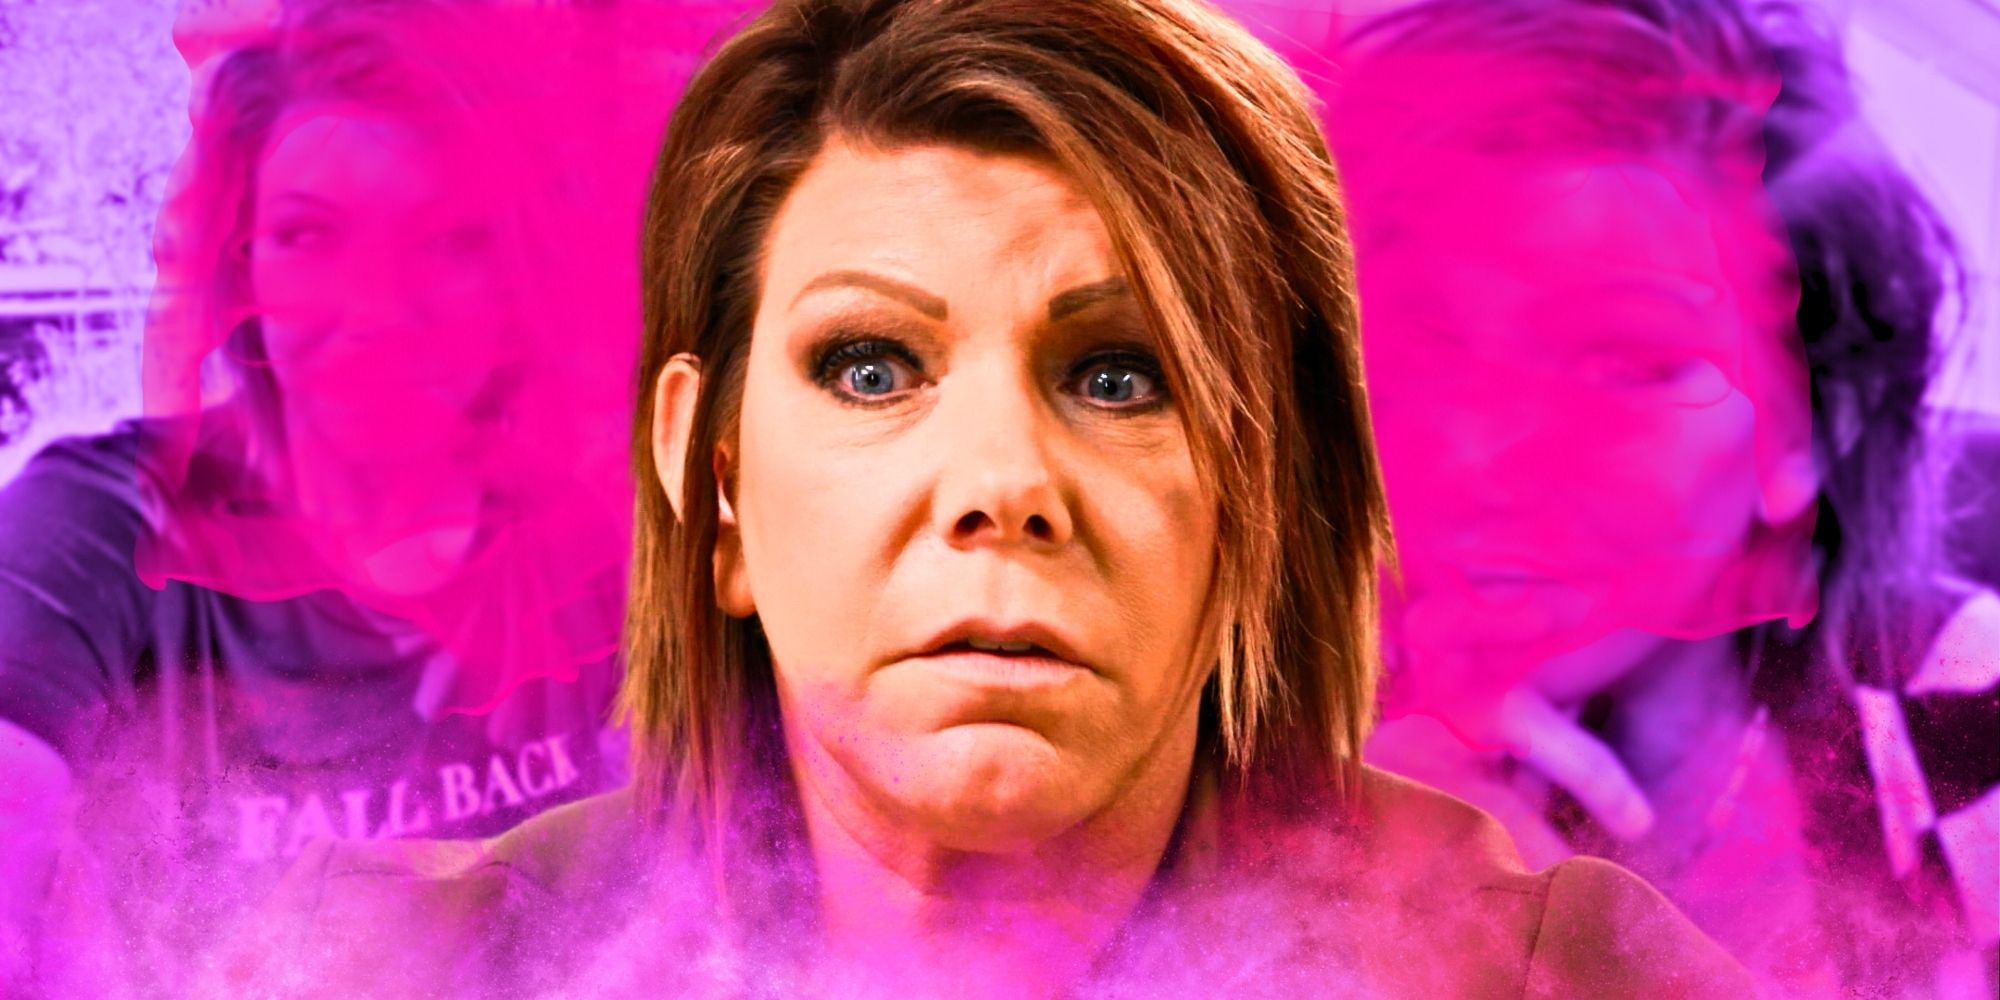 Montage of Sister Wives' Meri Brown with pink and purple background